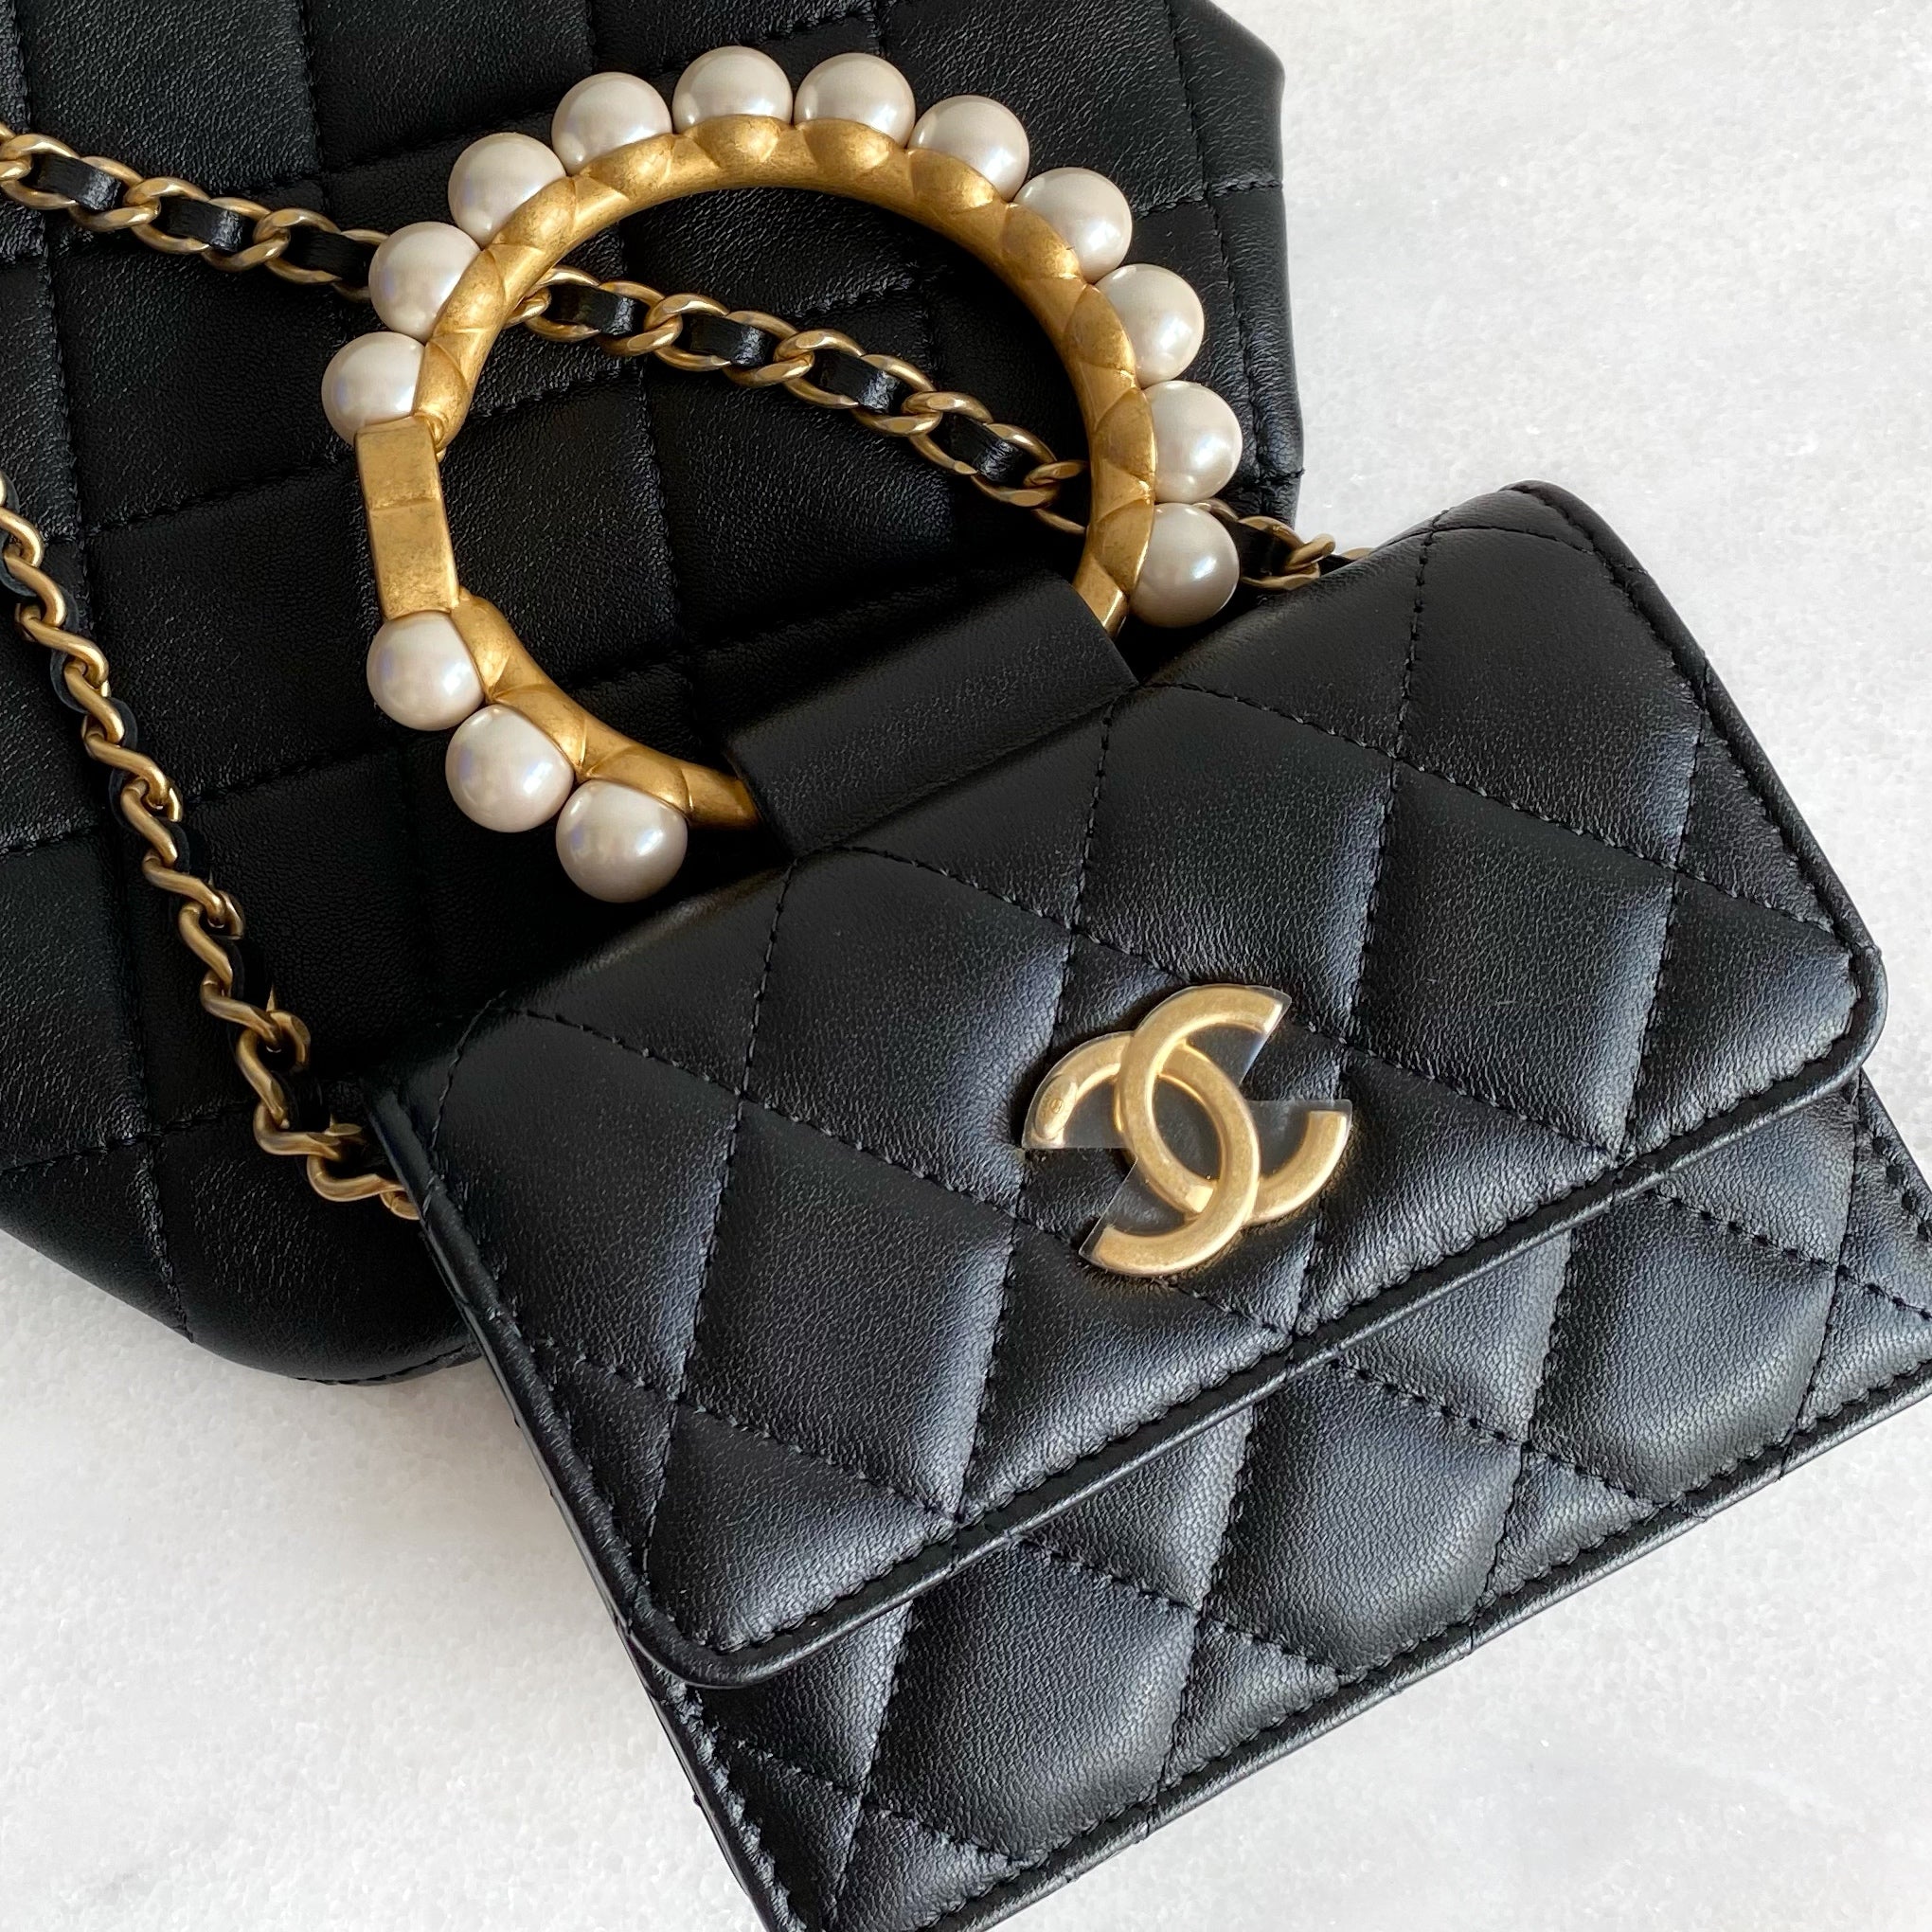 CHANEL  BLUE AND GOLD MINI FLAP BAG IN SEQUINS AND